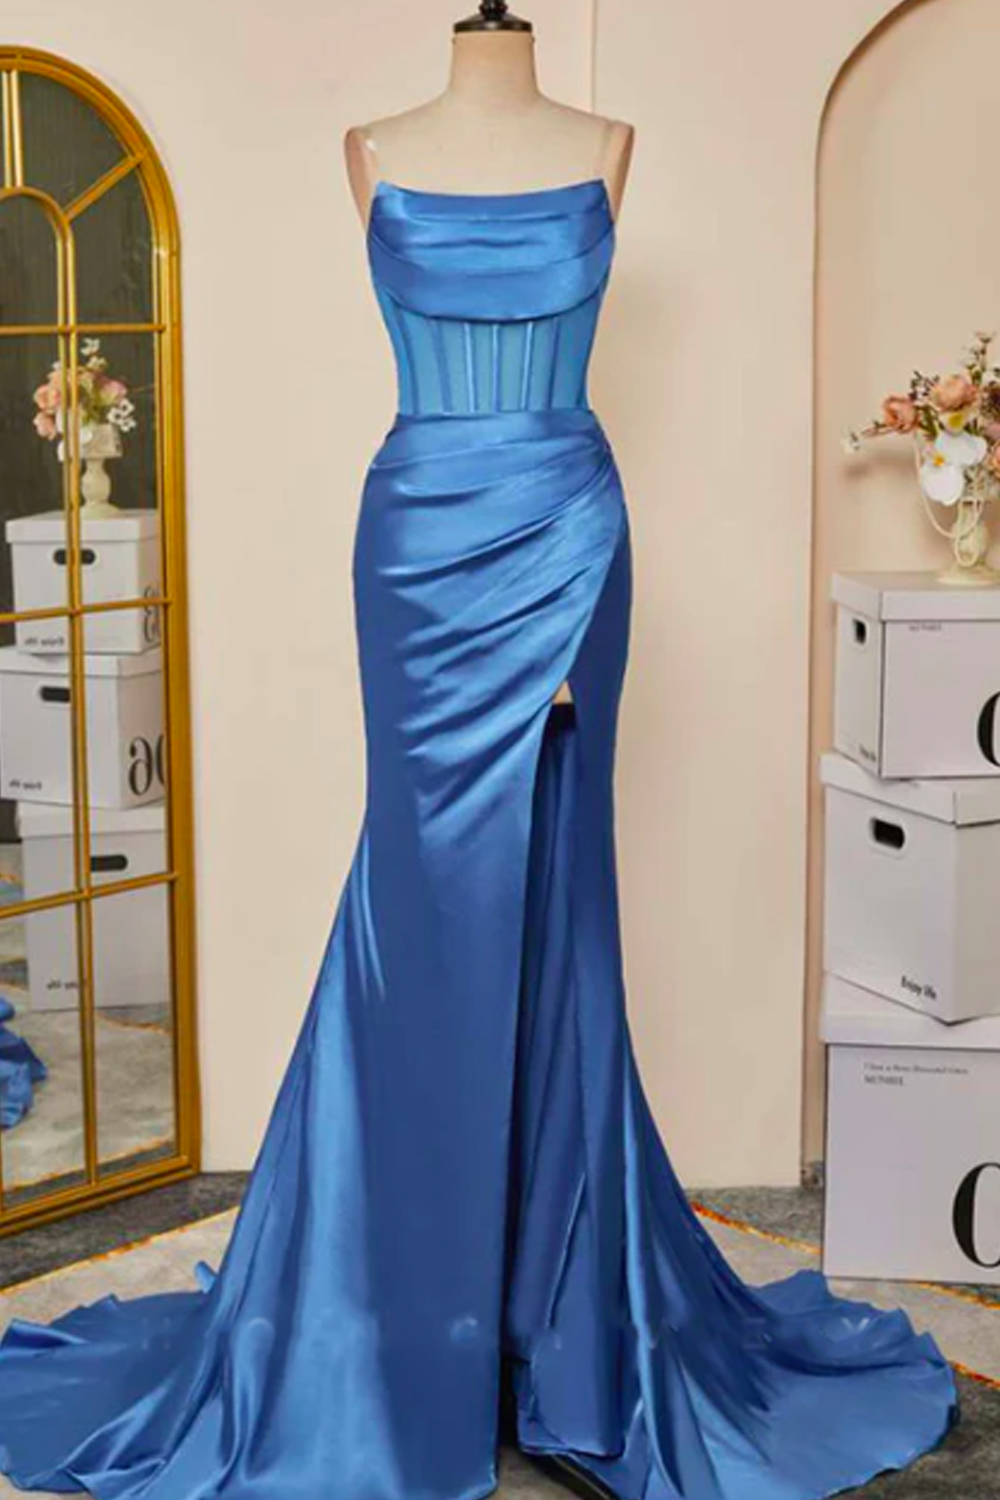 Sexy Satin Trumpet Bateau Strapless Empire Pleats With Side Slit Train Party Prom Evening Dress